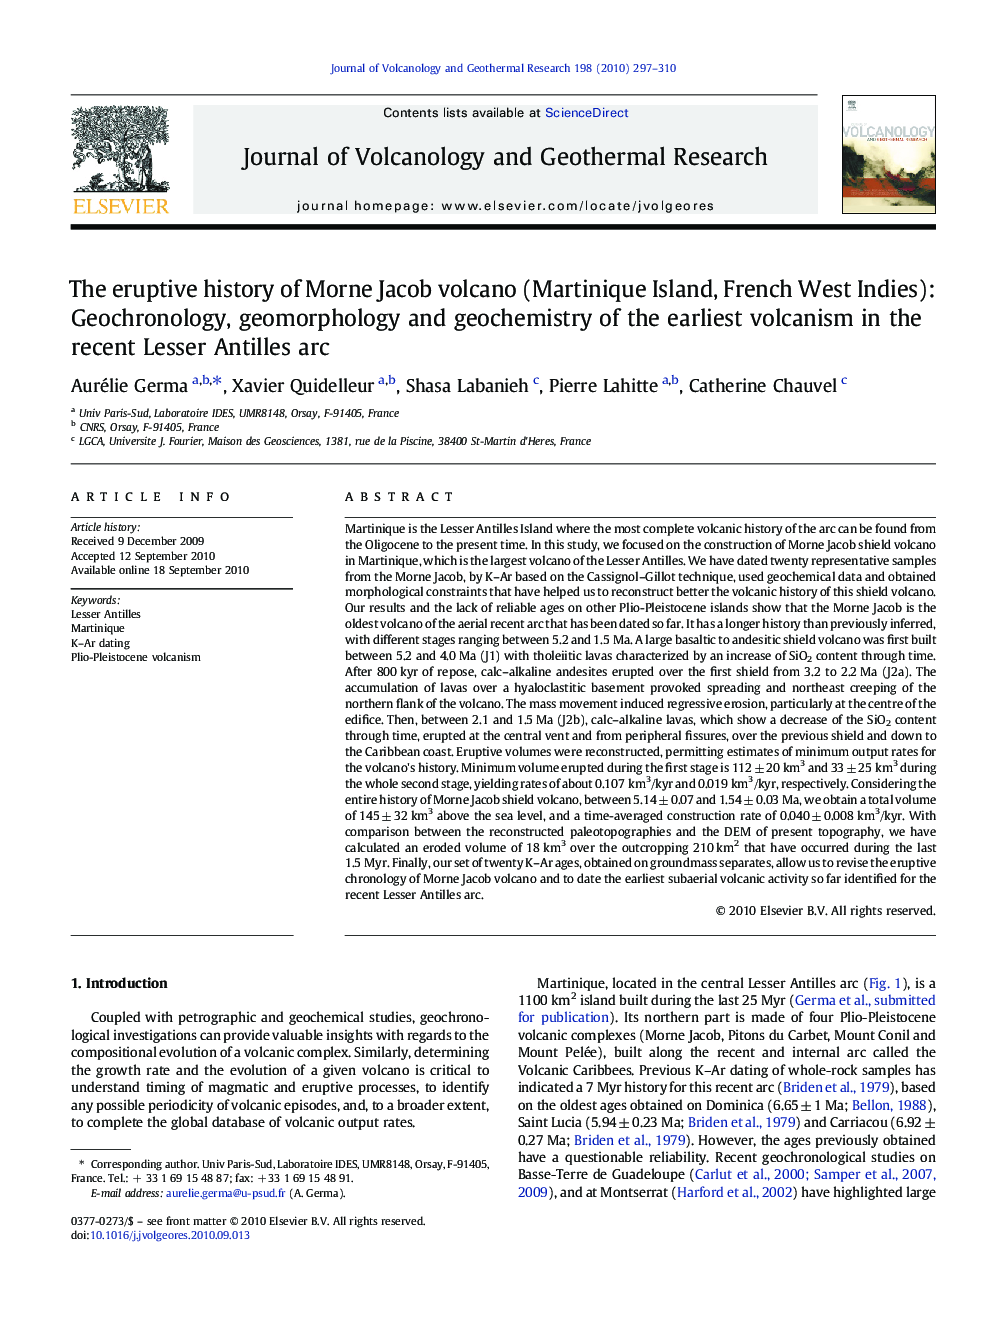 The eruptive history of Morne Jacob volcano (Martinique Island, French West Indies): Geochronology, geomorphology and geochemistry of the earliest volcanism in the recent Lesser Antilles arc